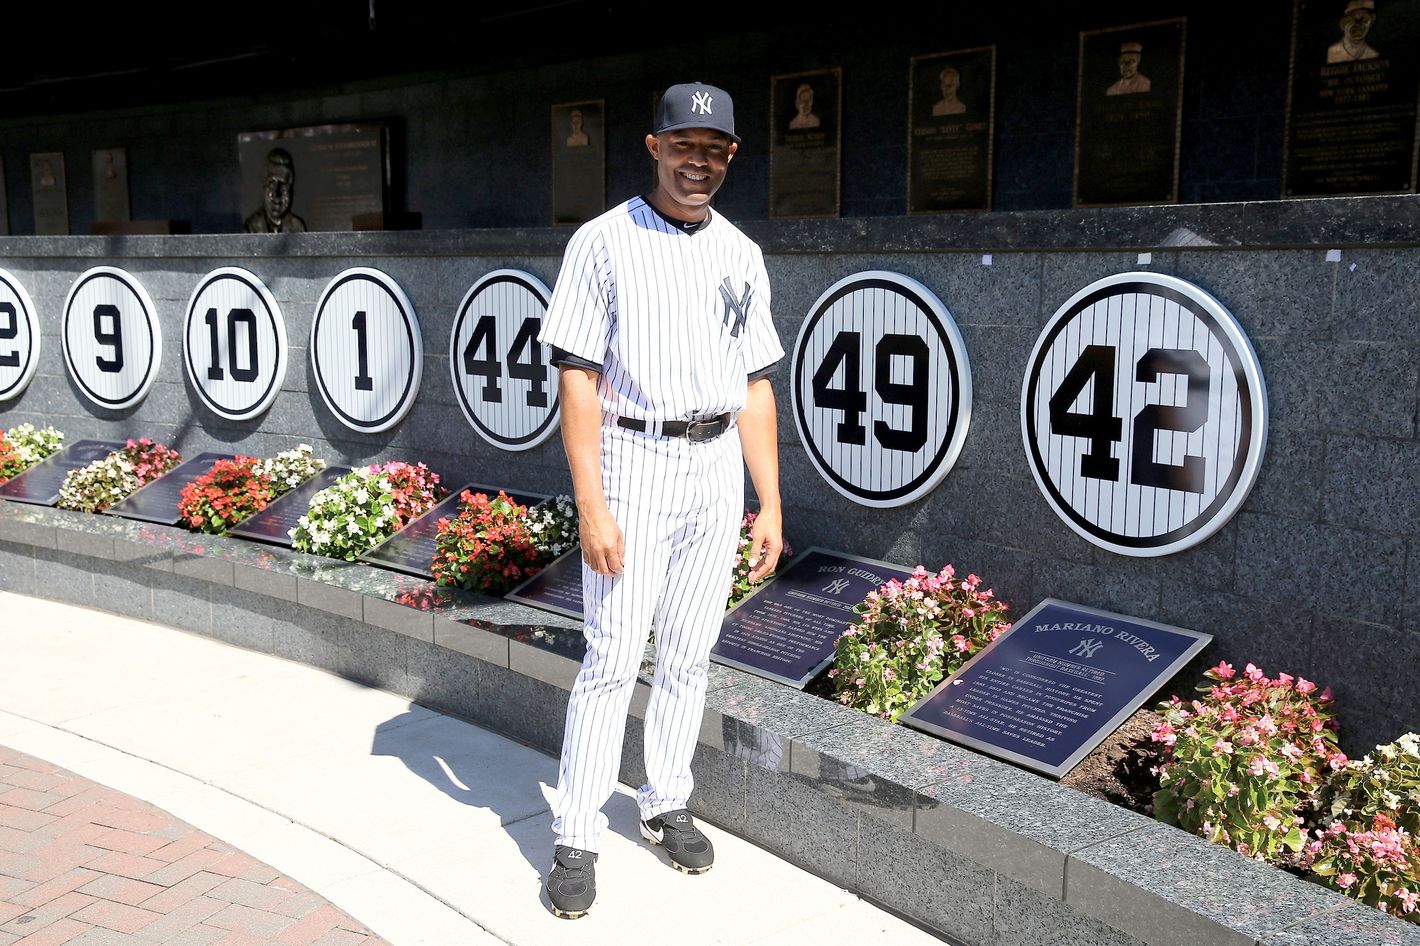 If the Boston Red Sox retired numbers like the New York Yankees do